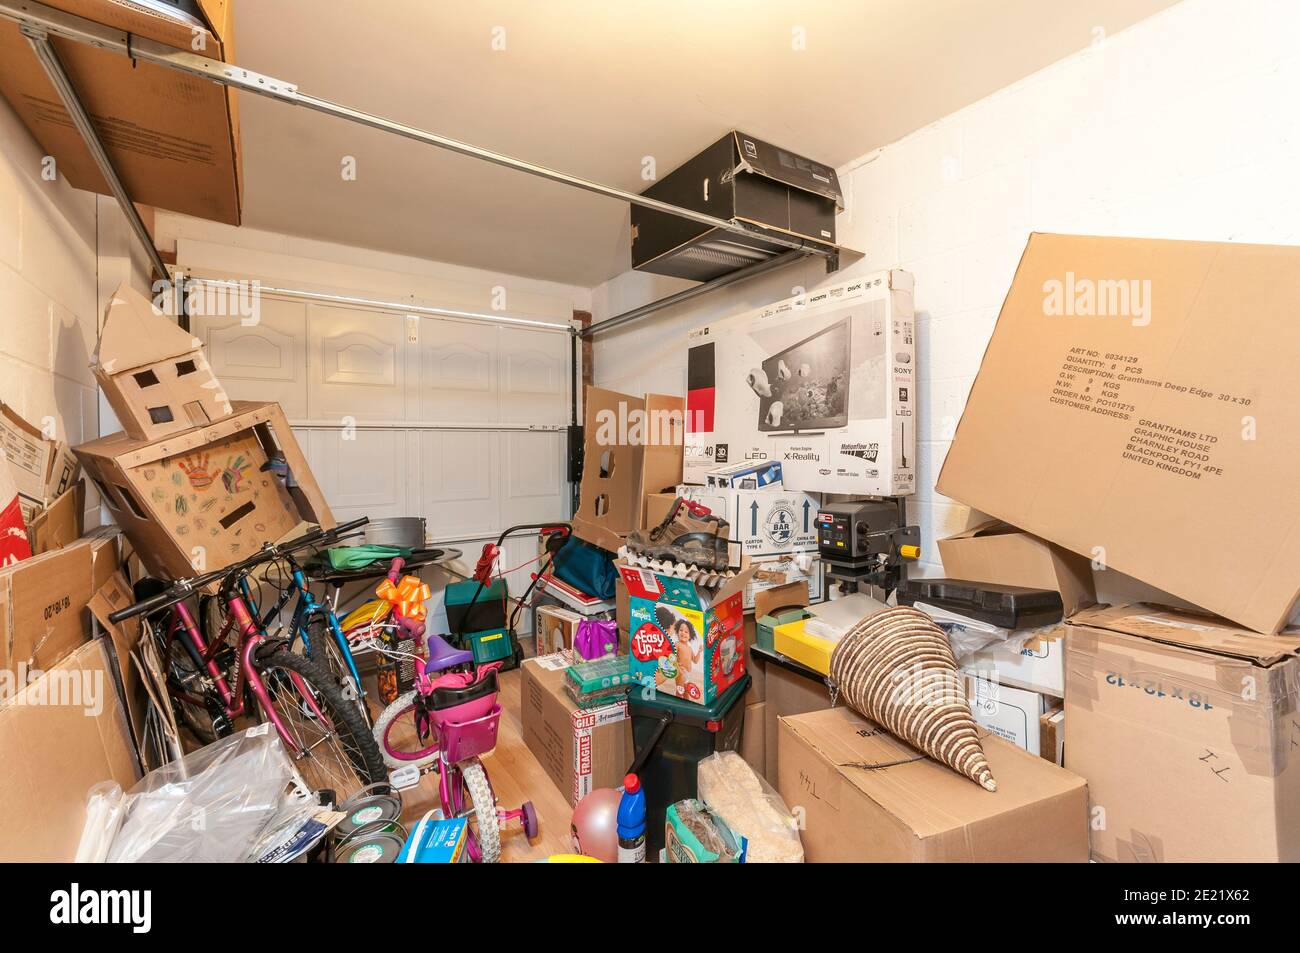 garage full of stored items,junk,piled high Stock Photo